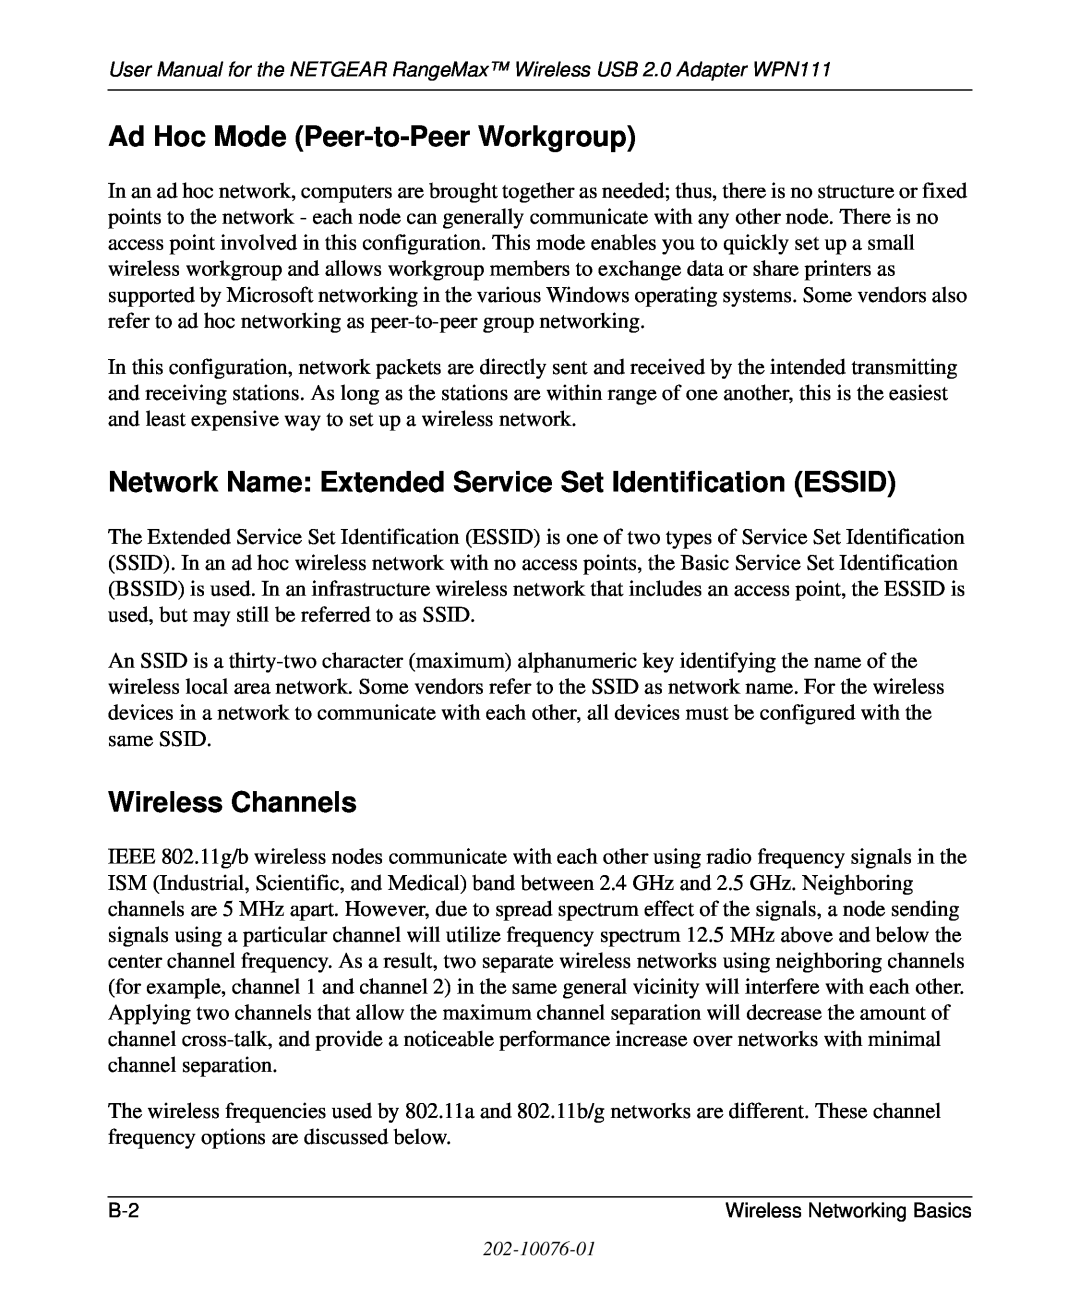 NETGEAR WPN111 user manual Ad Hoc Mode Peer-to-Peer Workgroup, Network Name Extended Service Set Identification ESSID 